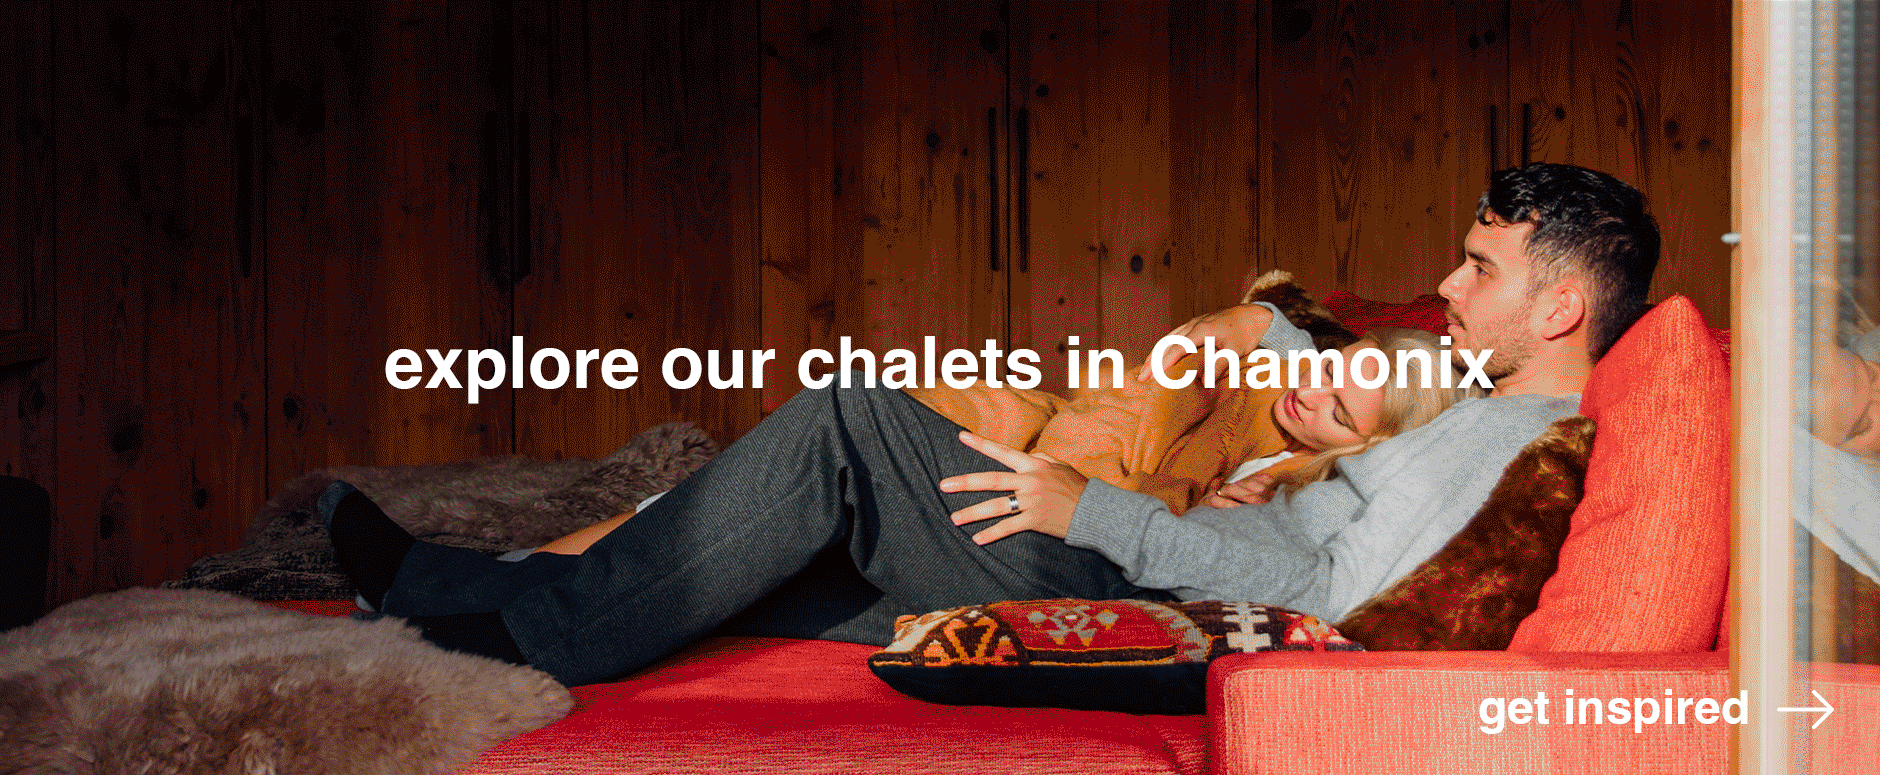 Explore our chalets in Chamonix